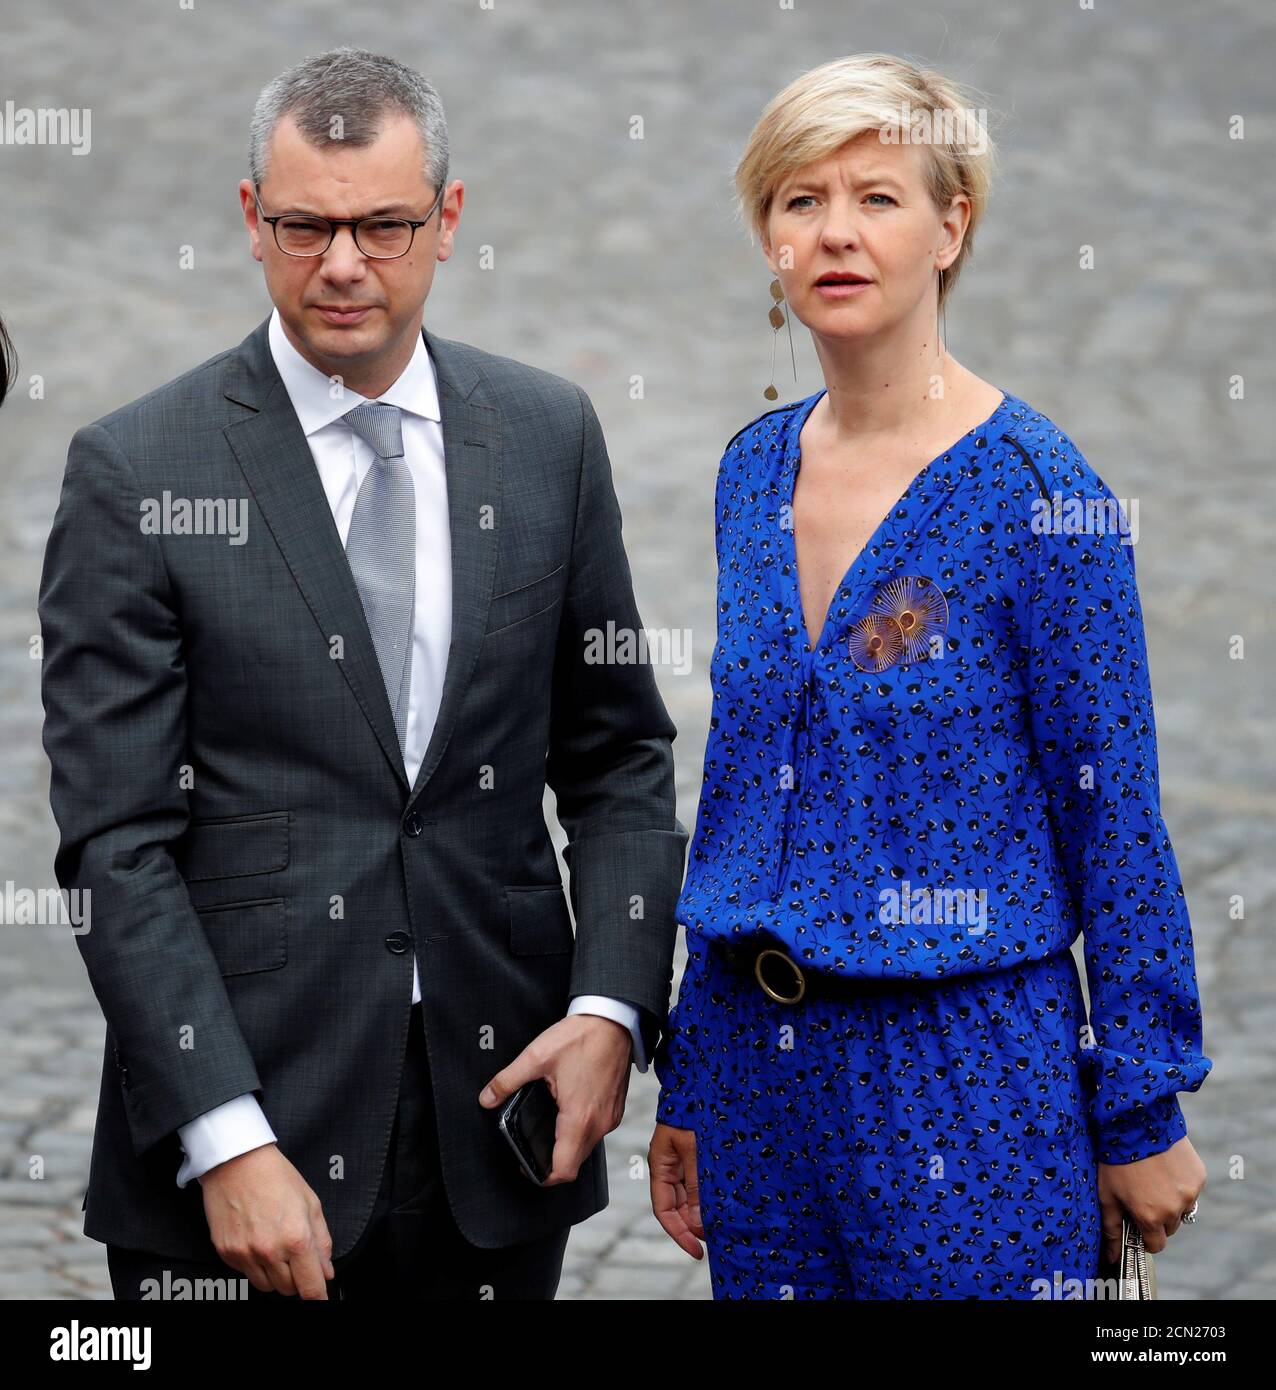 Elysee general secretary Alexis Kohler and his wife Sylvie Schirm arrive to  attend the traditional Bastille